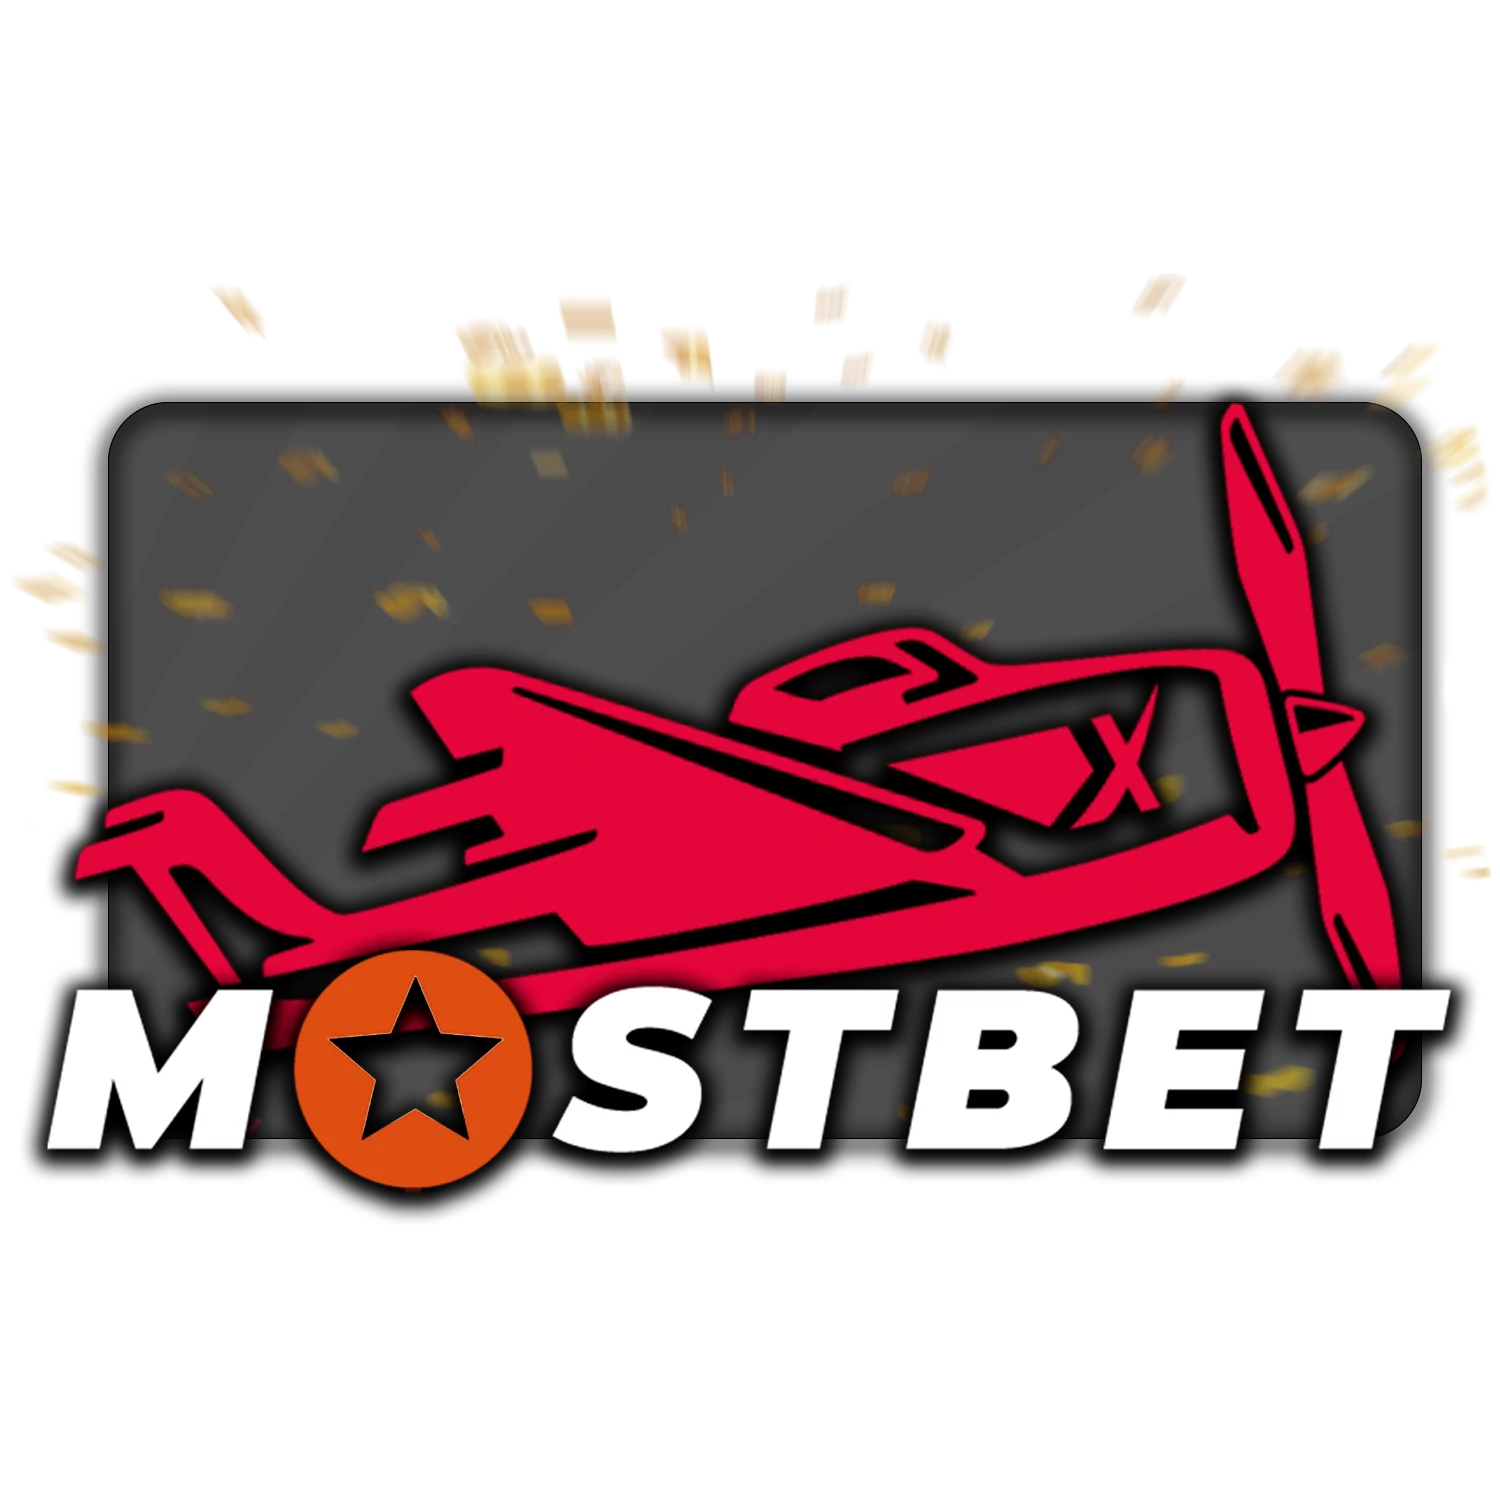 25 Of The Punniest Mostbet betting company and casino in India Puns You Can Find